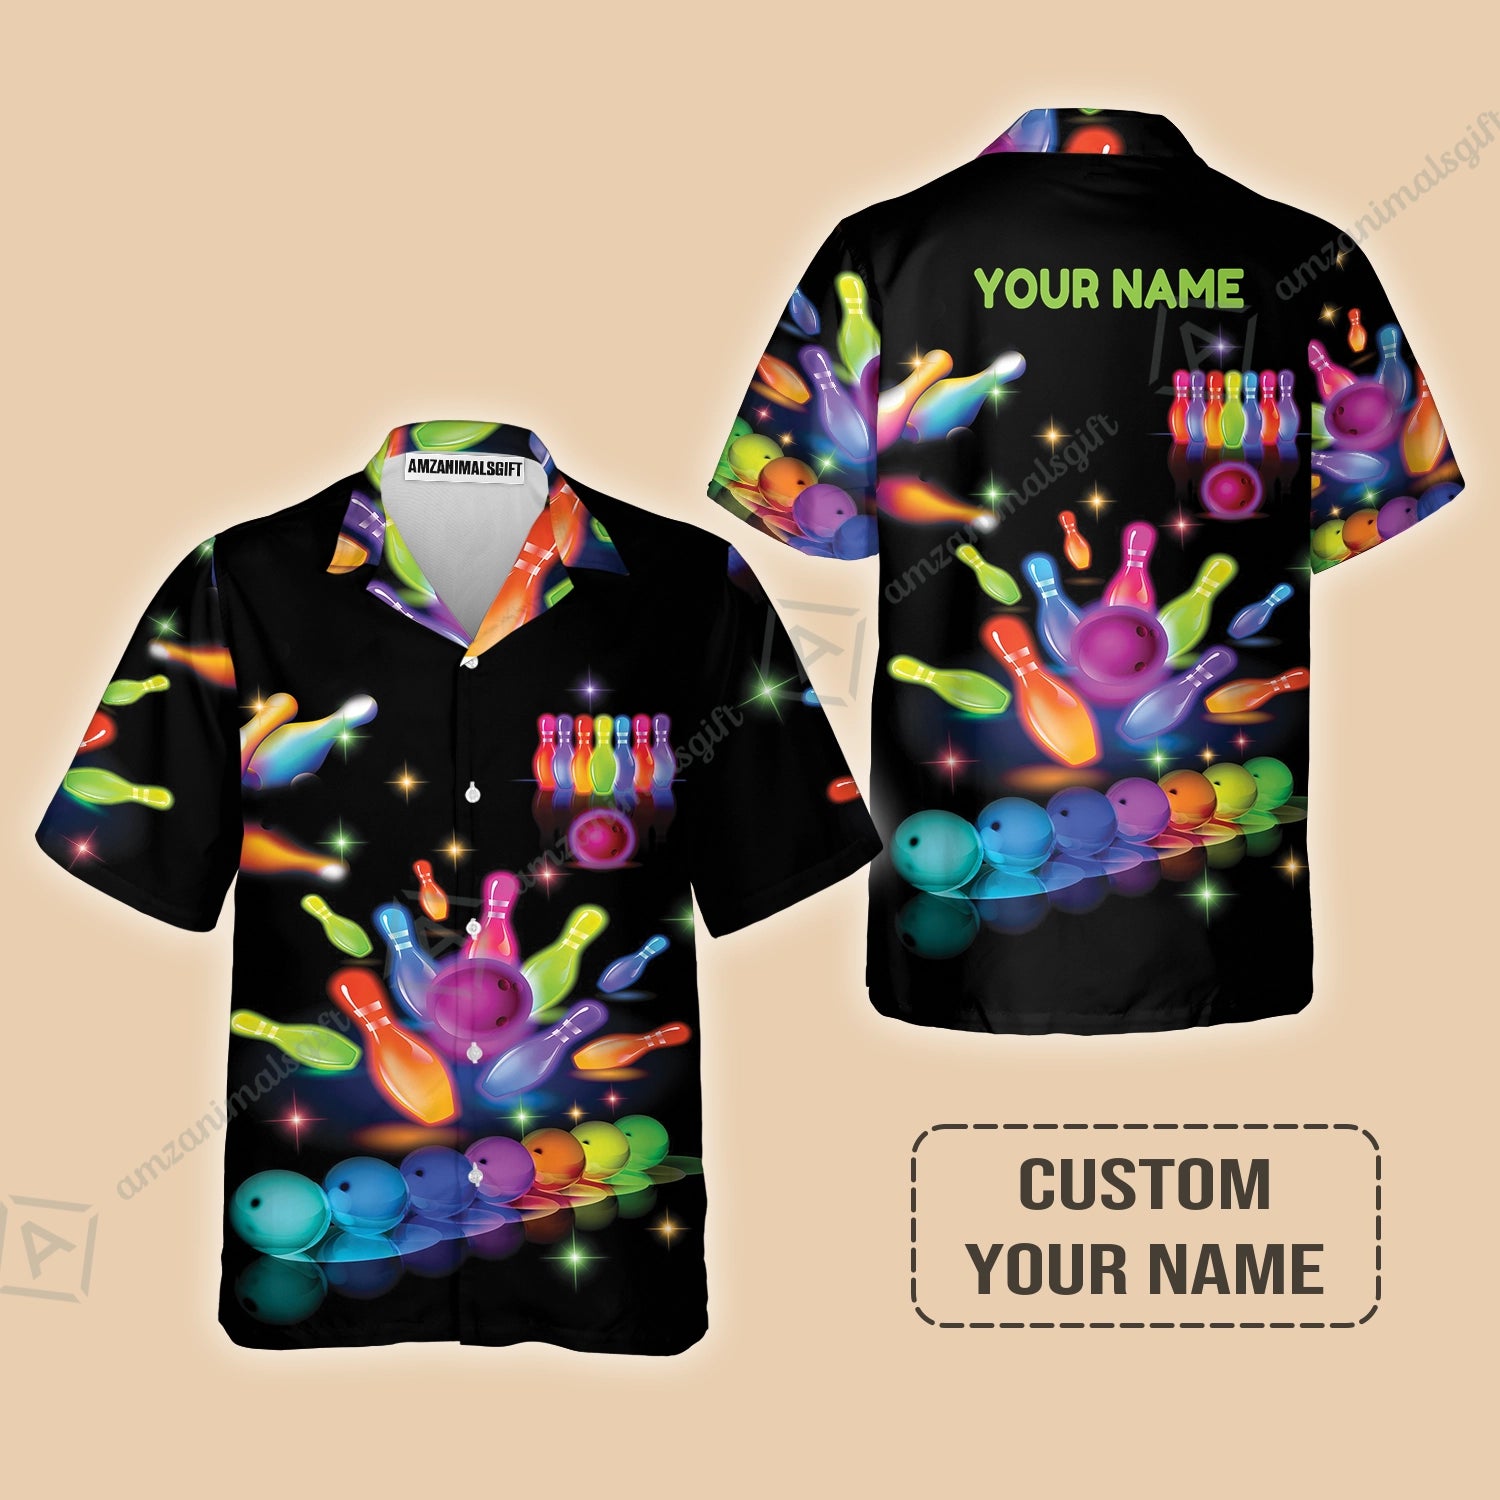 Bowling Hawaiian Shirt With Custom Name, Colorful Bowling Pattern Shirt For Men And Women, Perfect Outfits For Bowling Lovers, Bowlers